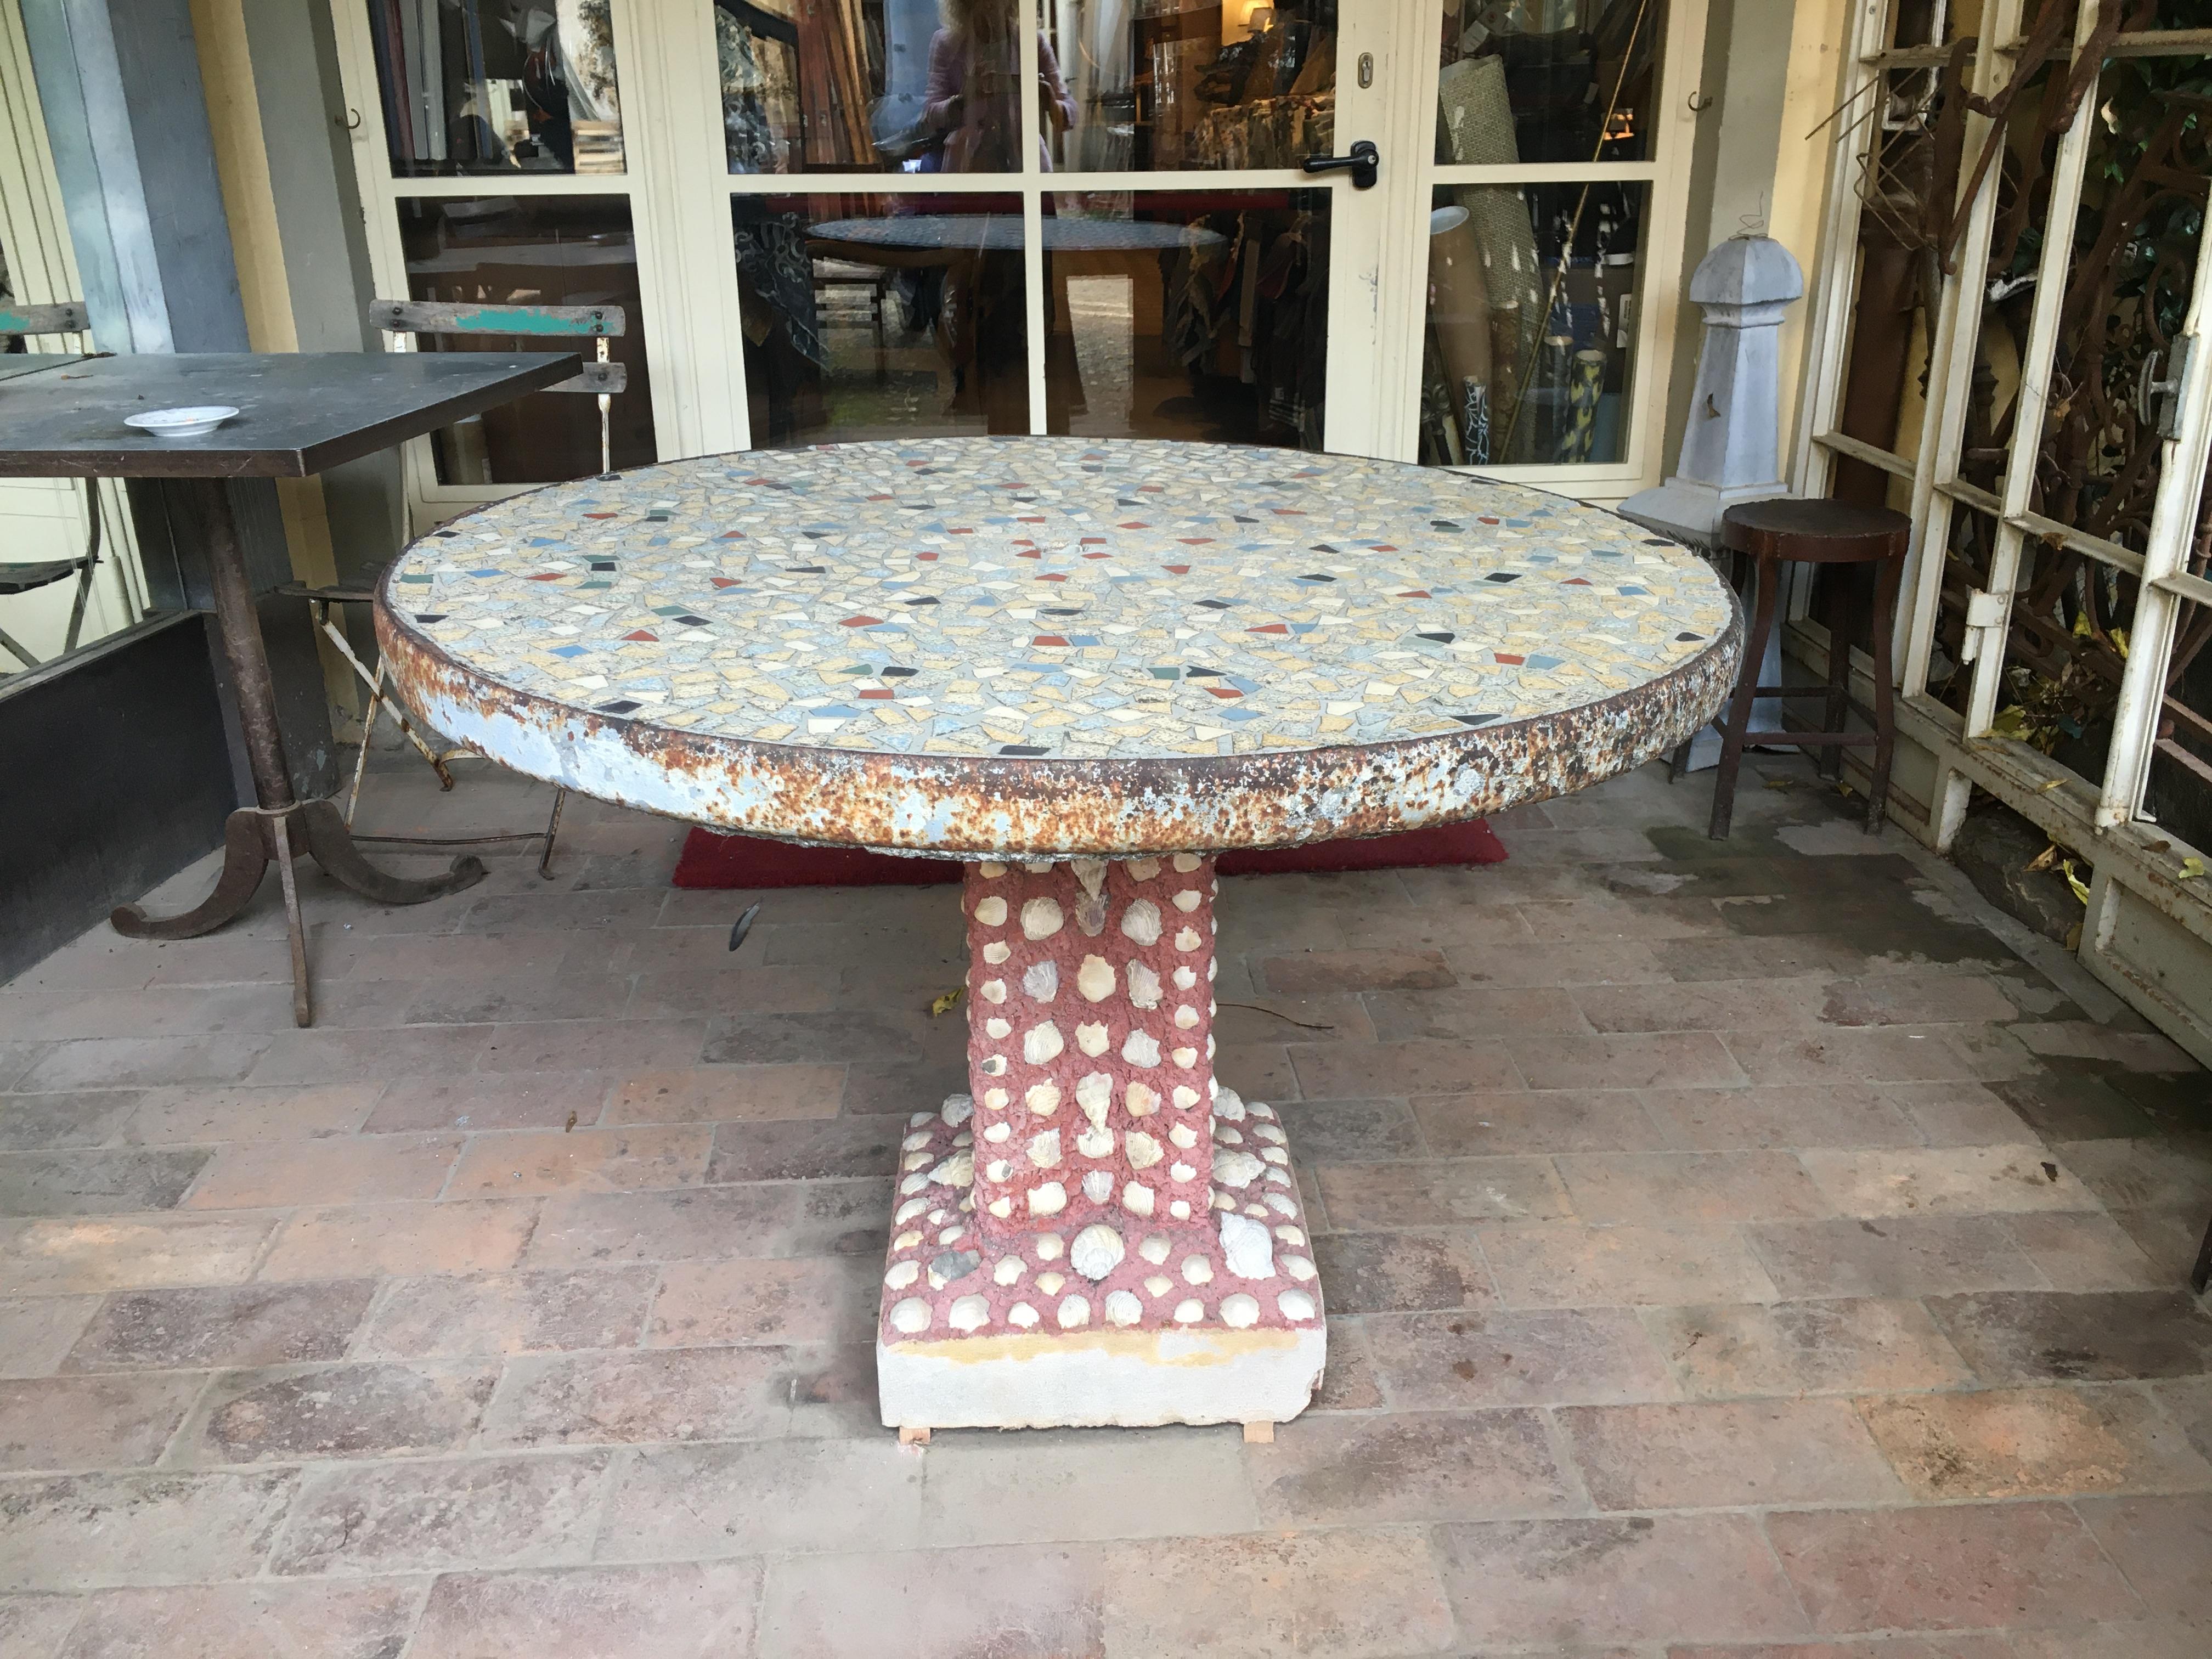 Mid-Century Modern Italian garden table with mosaic and shells, 1960s
This wonderful garden round table has cement mosaic top and cement pedestal with true shells insert.